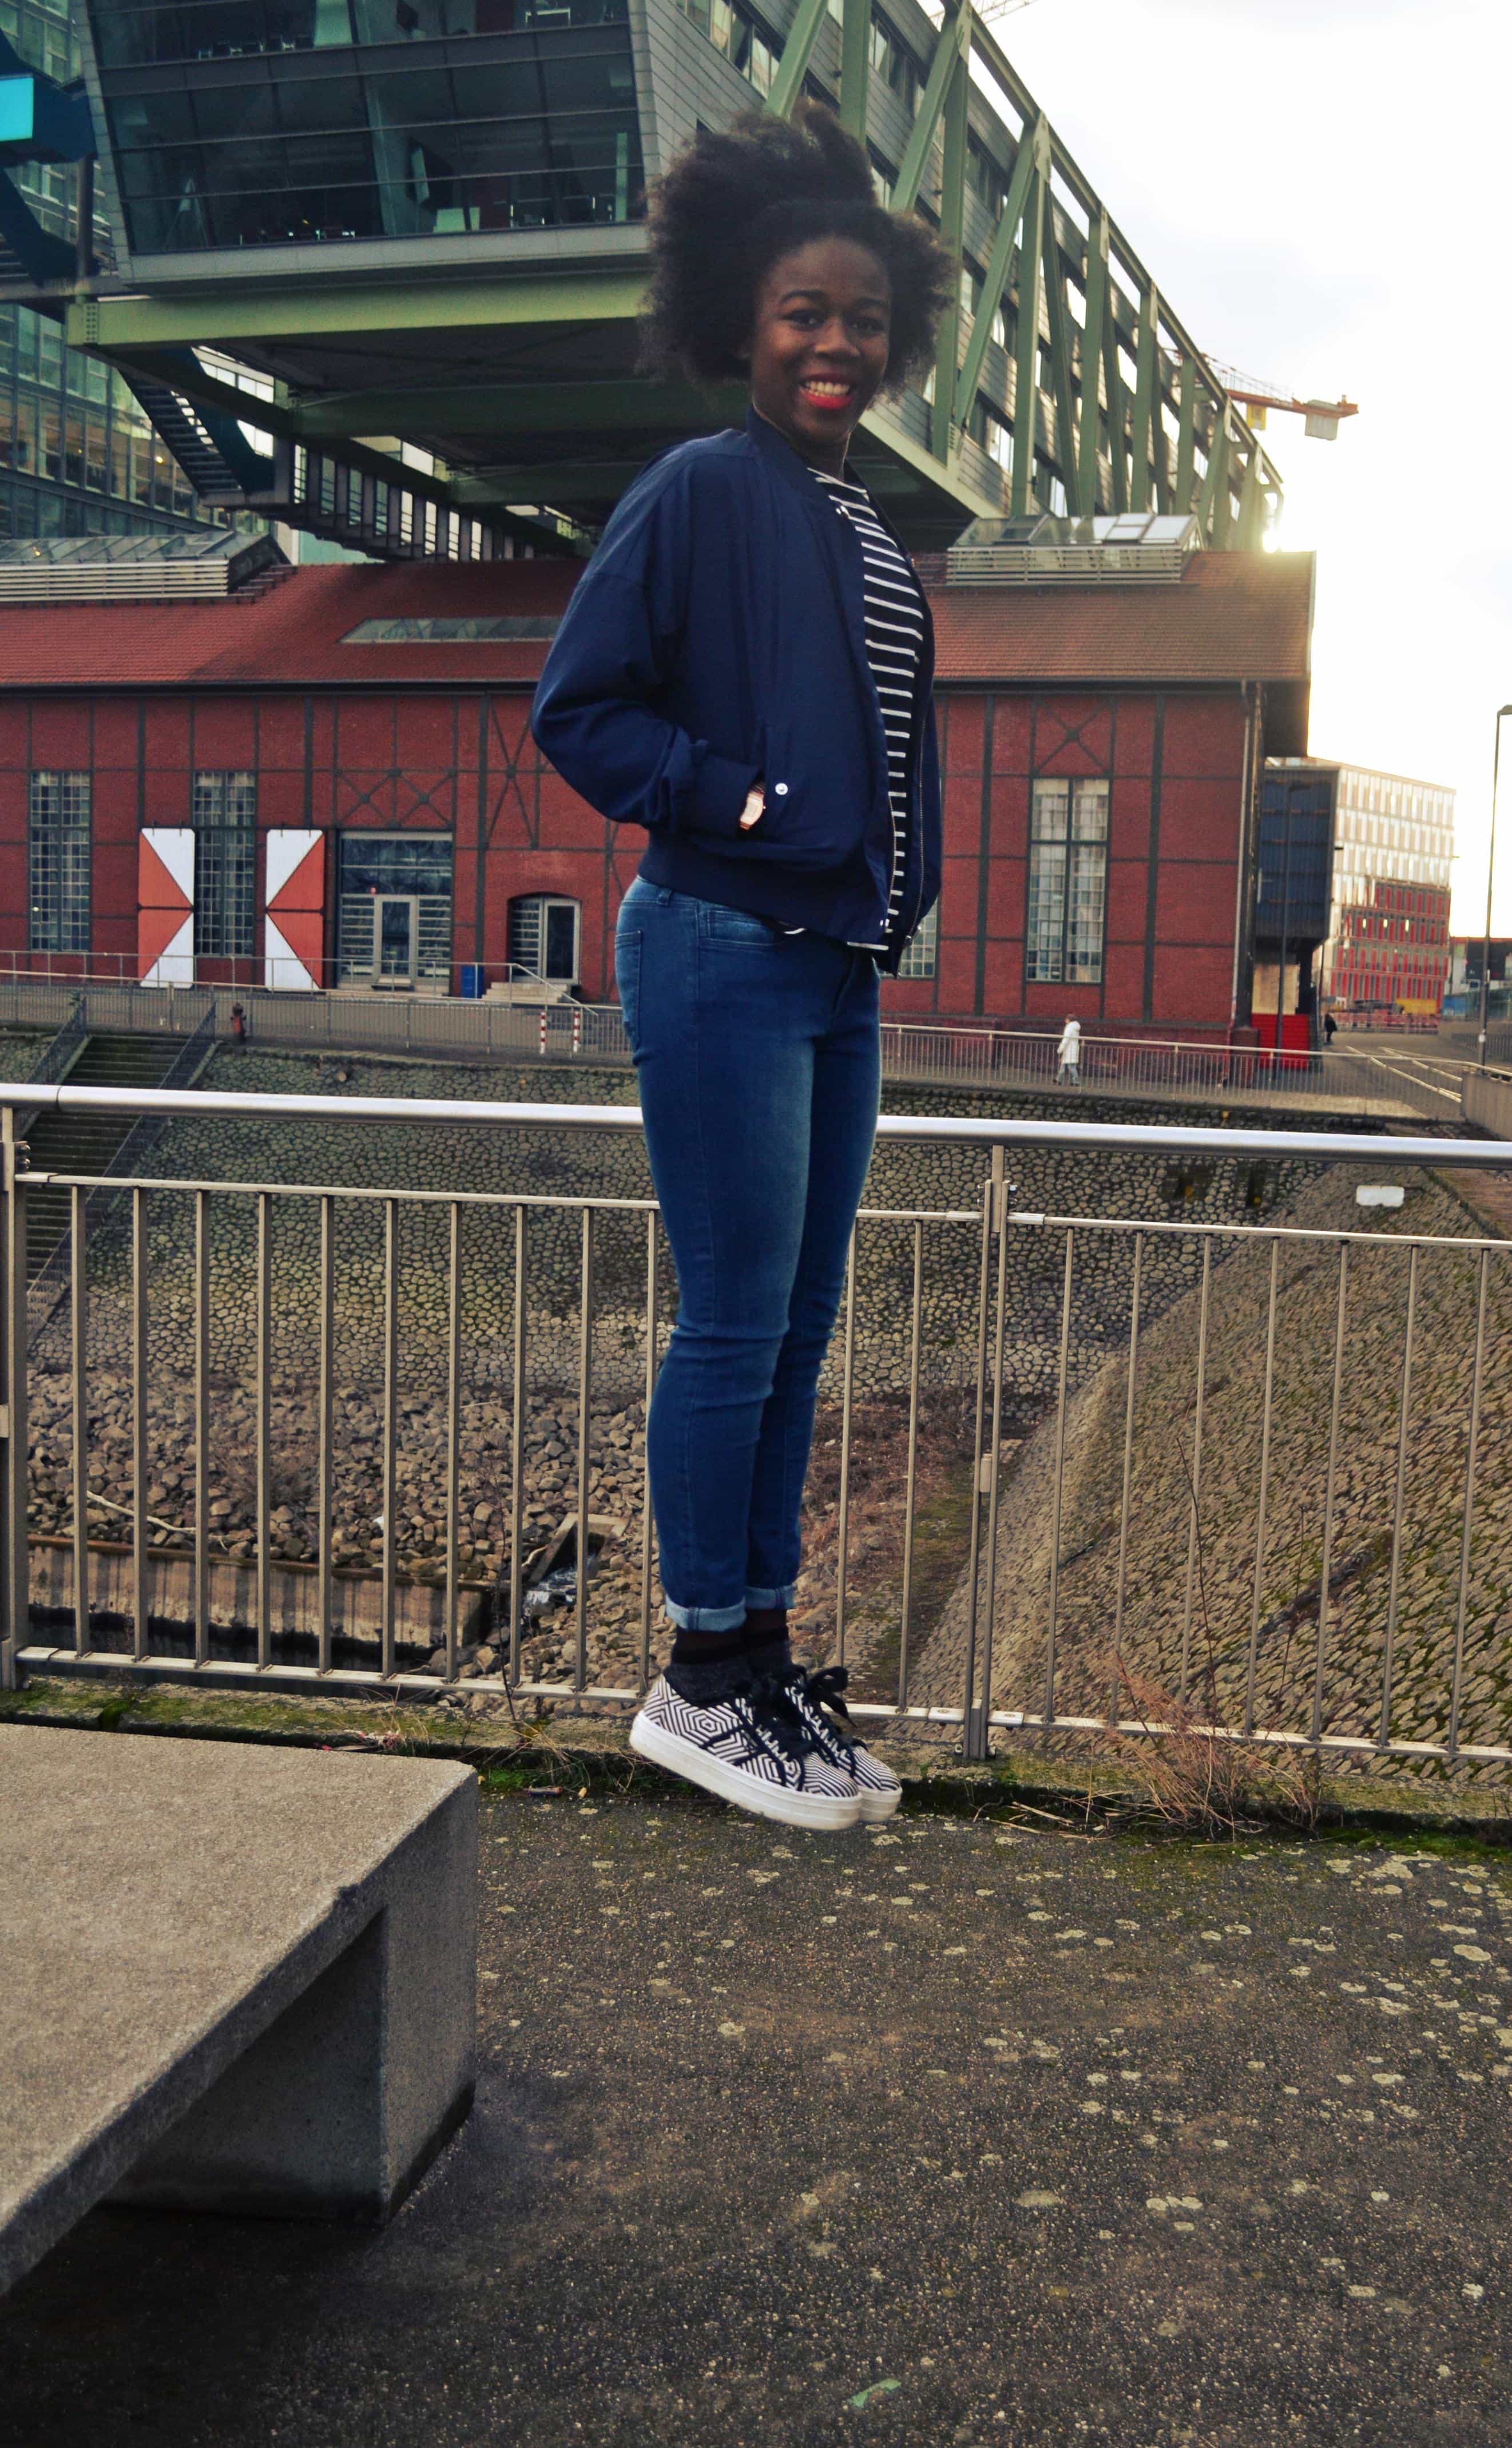 A woman with an afro wearing a navy blue bomber jacket, a black and white stripy t-shirt, blue skinny jeans and black and white stripy platform shoes jumps from a bench and smiles at the camera.